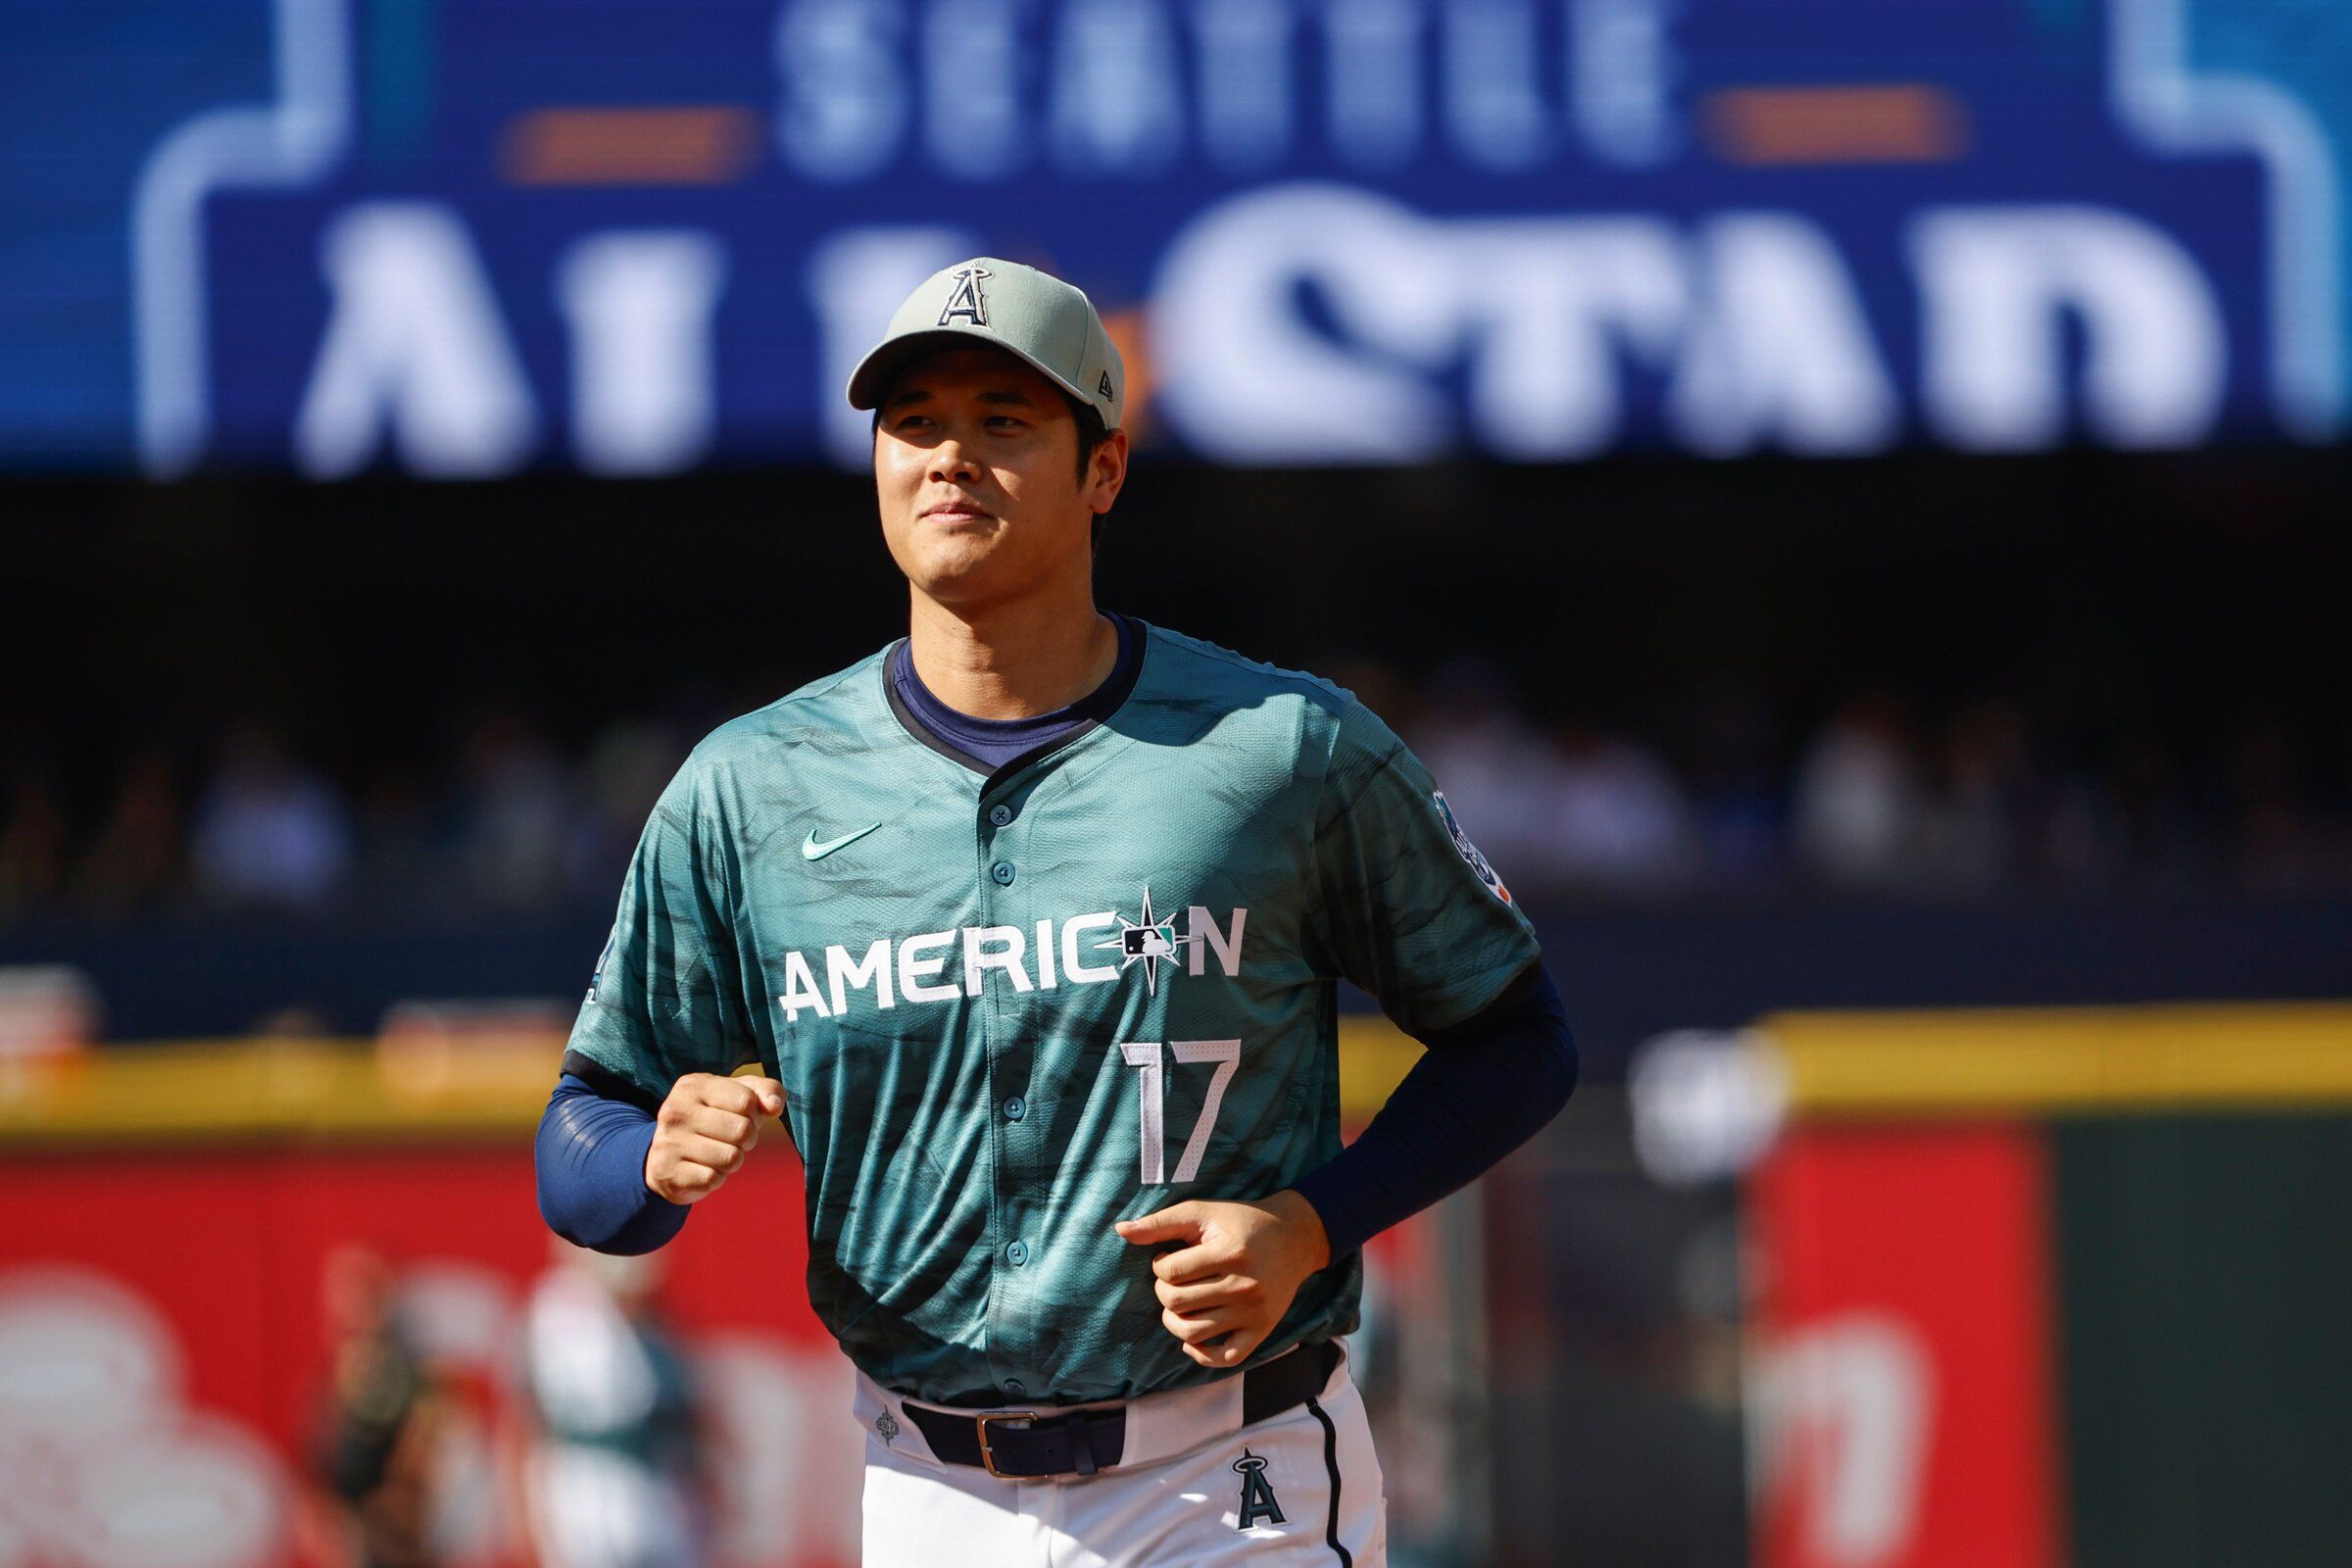 Seattle fans wow Shohei Ohtani at MLB All-Star Game, give him reason to consider Mariners The Seattle Times